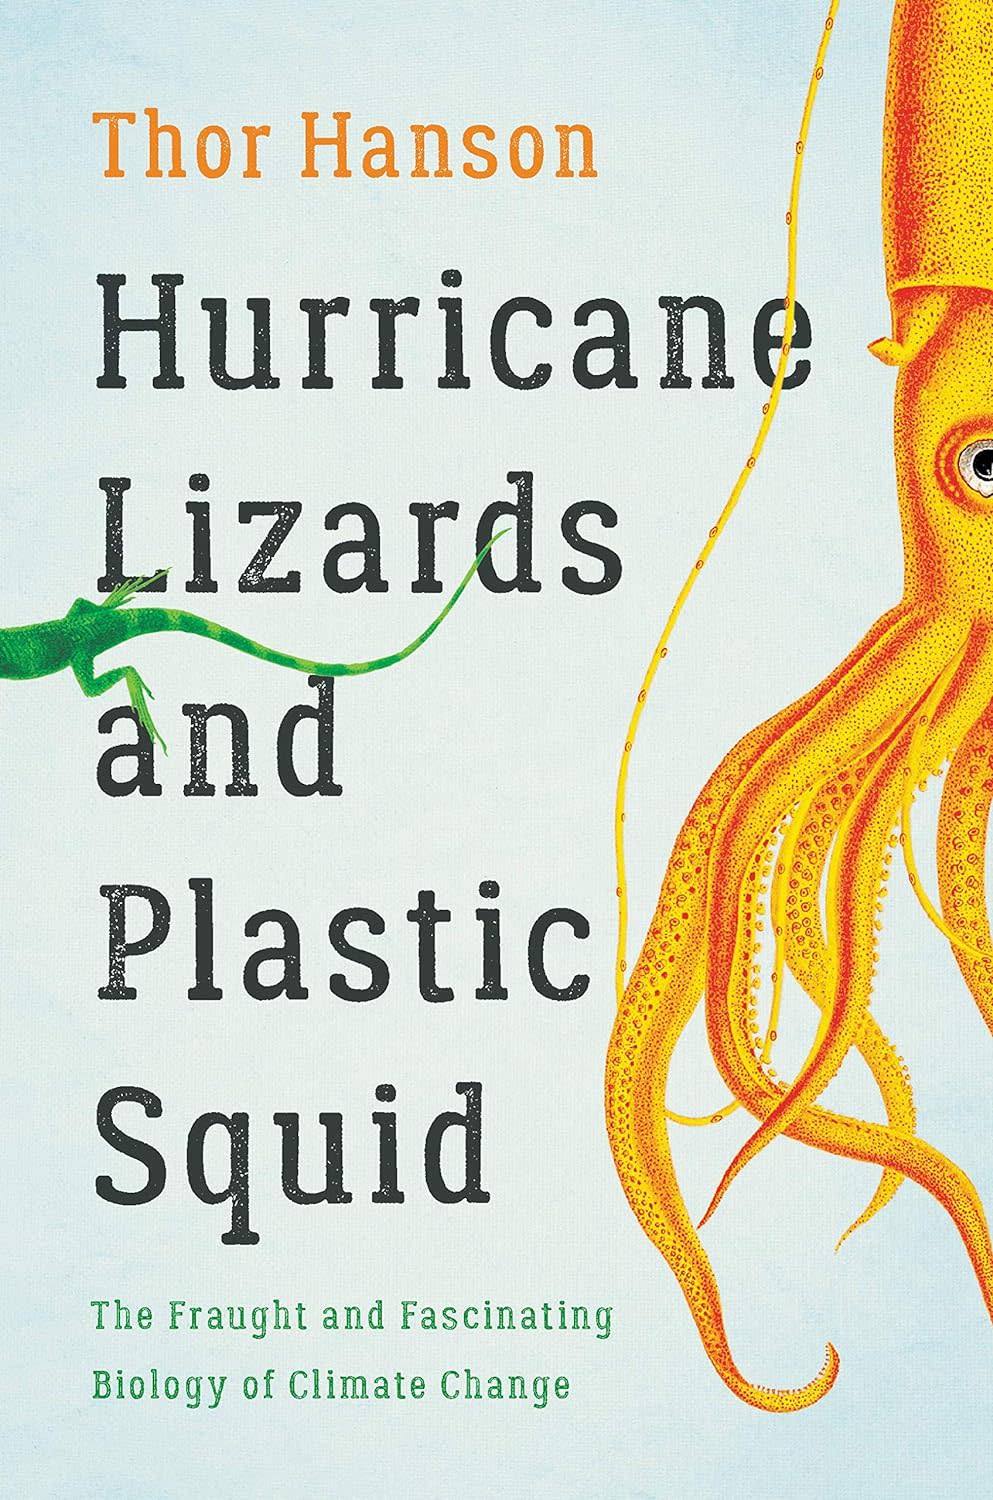 "Hurricane Lizards and Plastic Squid: The Fraught and Fascinating Biology of Climate Change," by Thor Hanson